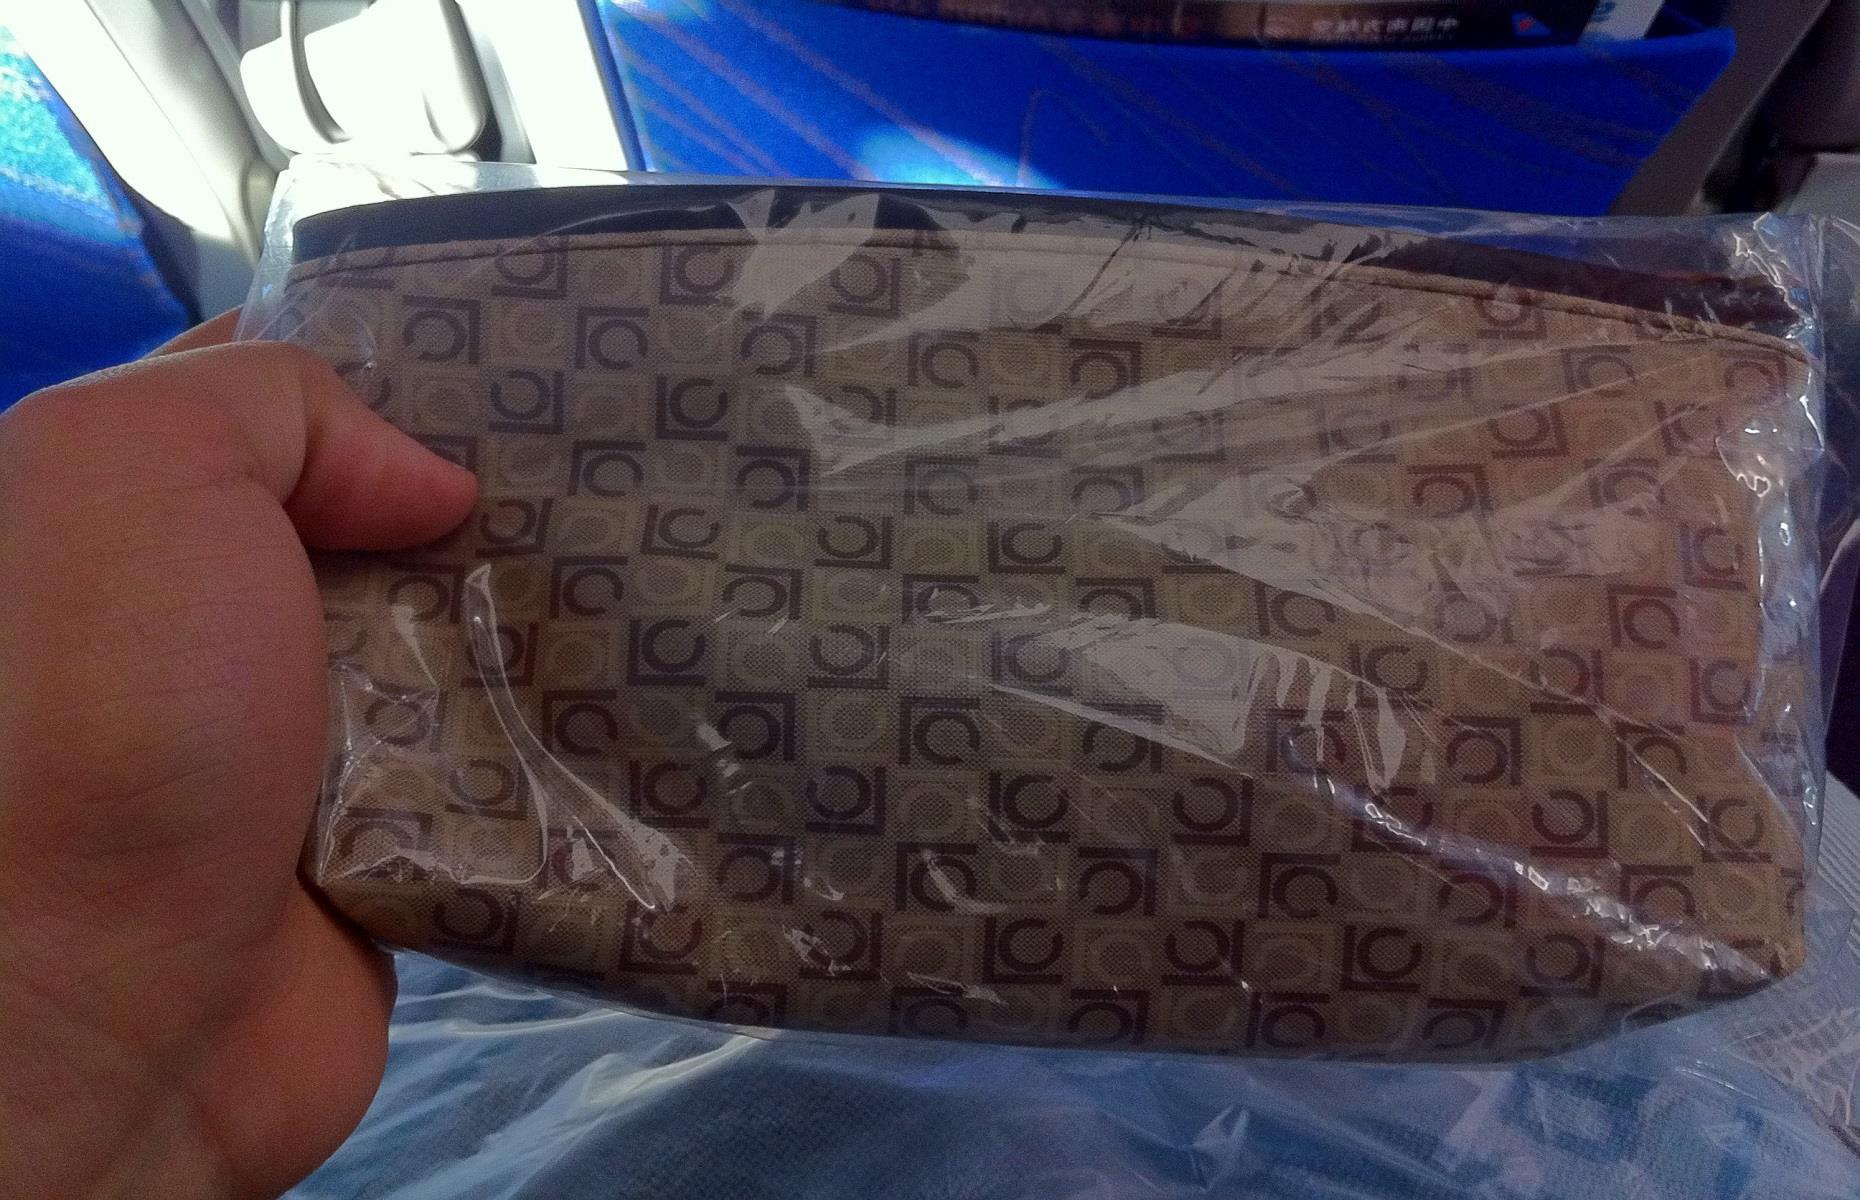 What Are The Top Five Most Counterfeited Handbags Available?